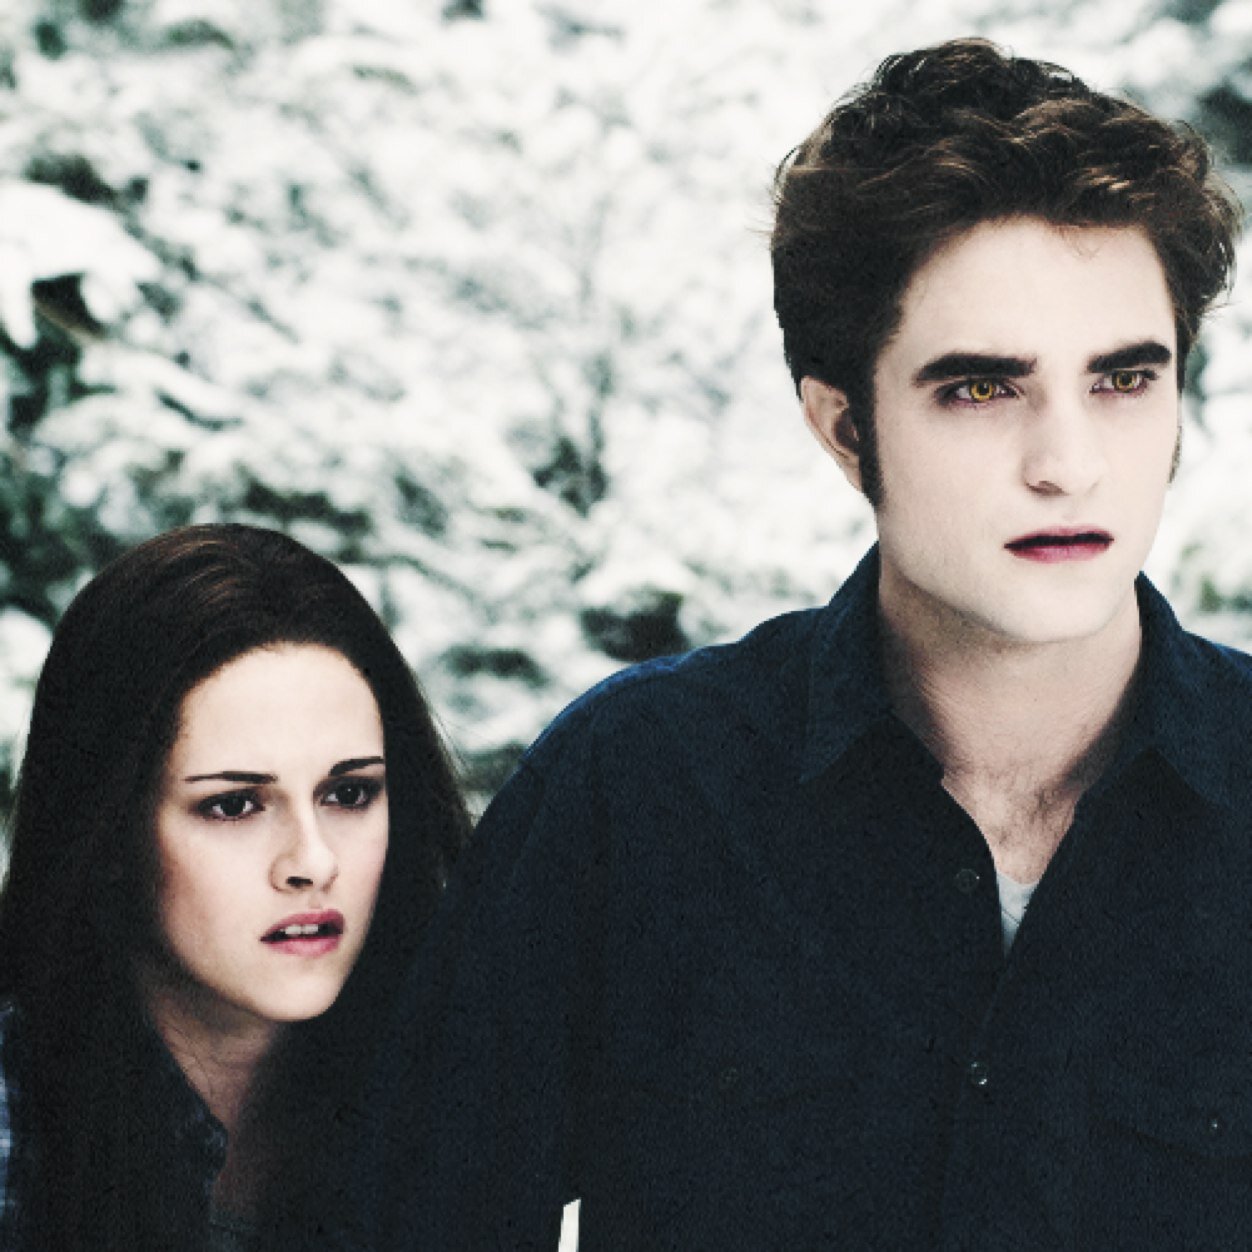 Never use this account, follow my other one: @_pr0udTWIHARD ✨ I follow everyone back!!